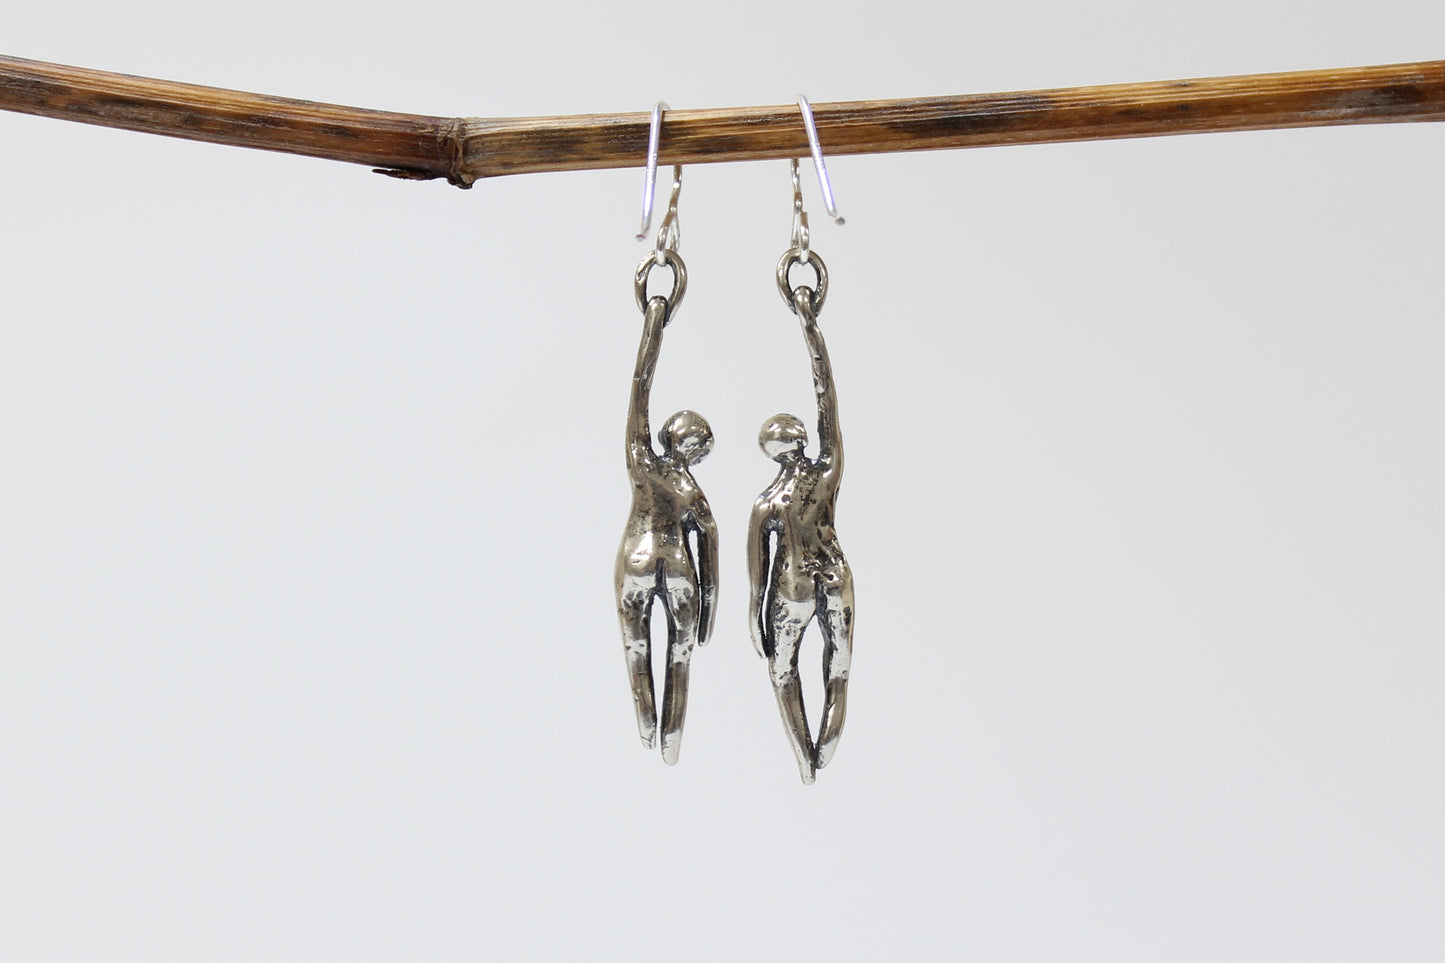 SILVER Hang in There Buddy Earrings. Sterling silver. 1 1/2" x 1/2"